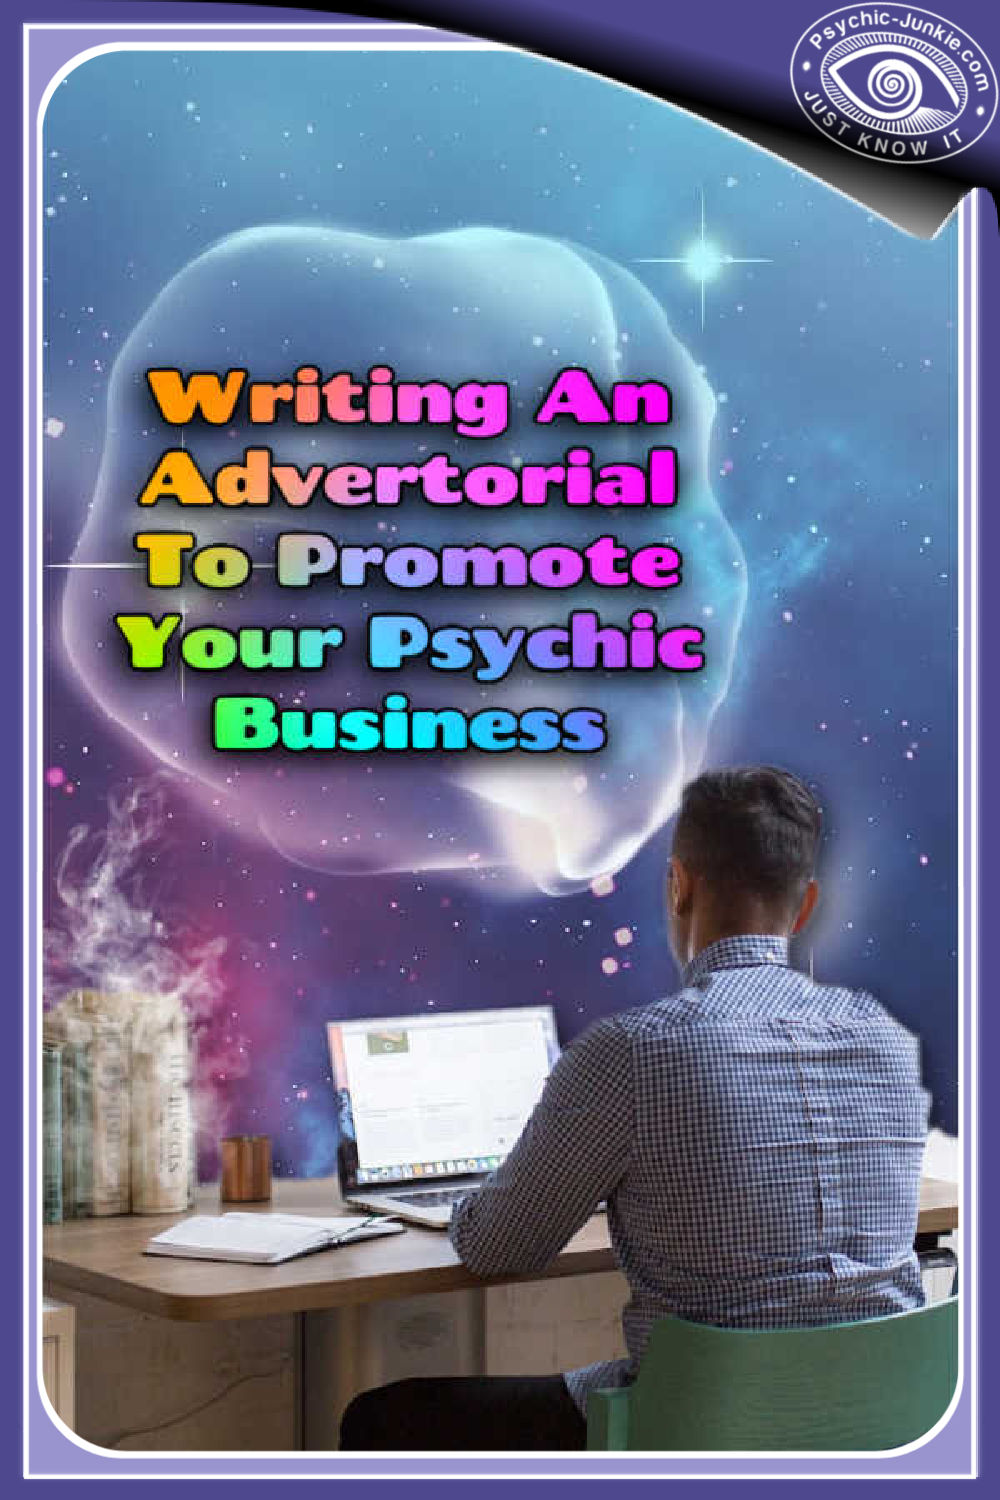 How To Promote Your Psychic Business By Writing An Advertorial With Heart And Soul